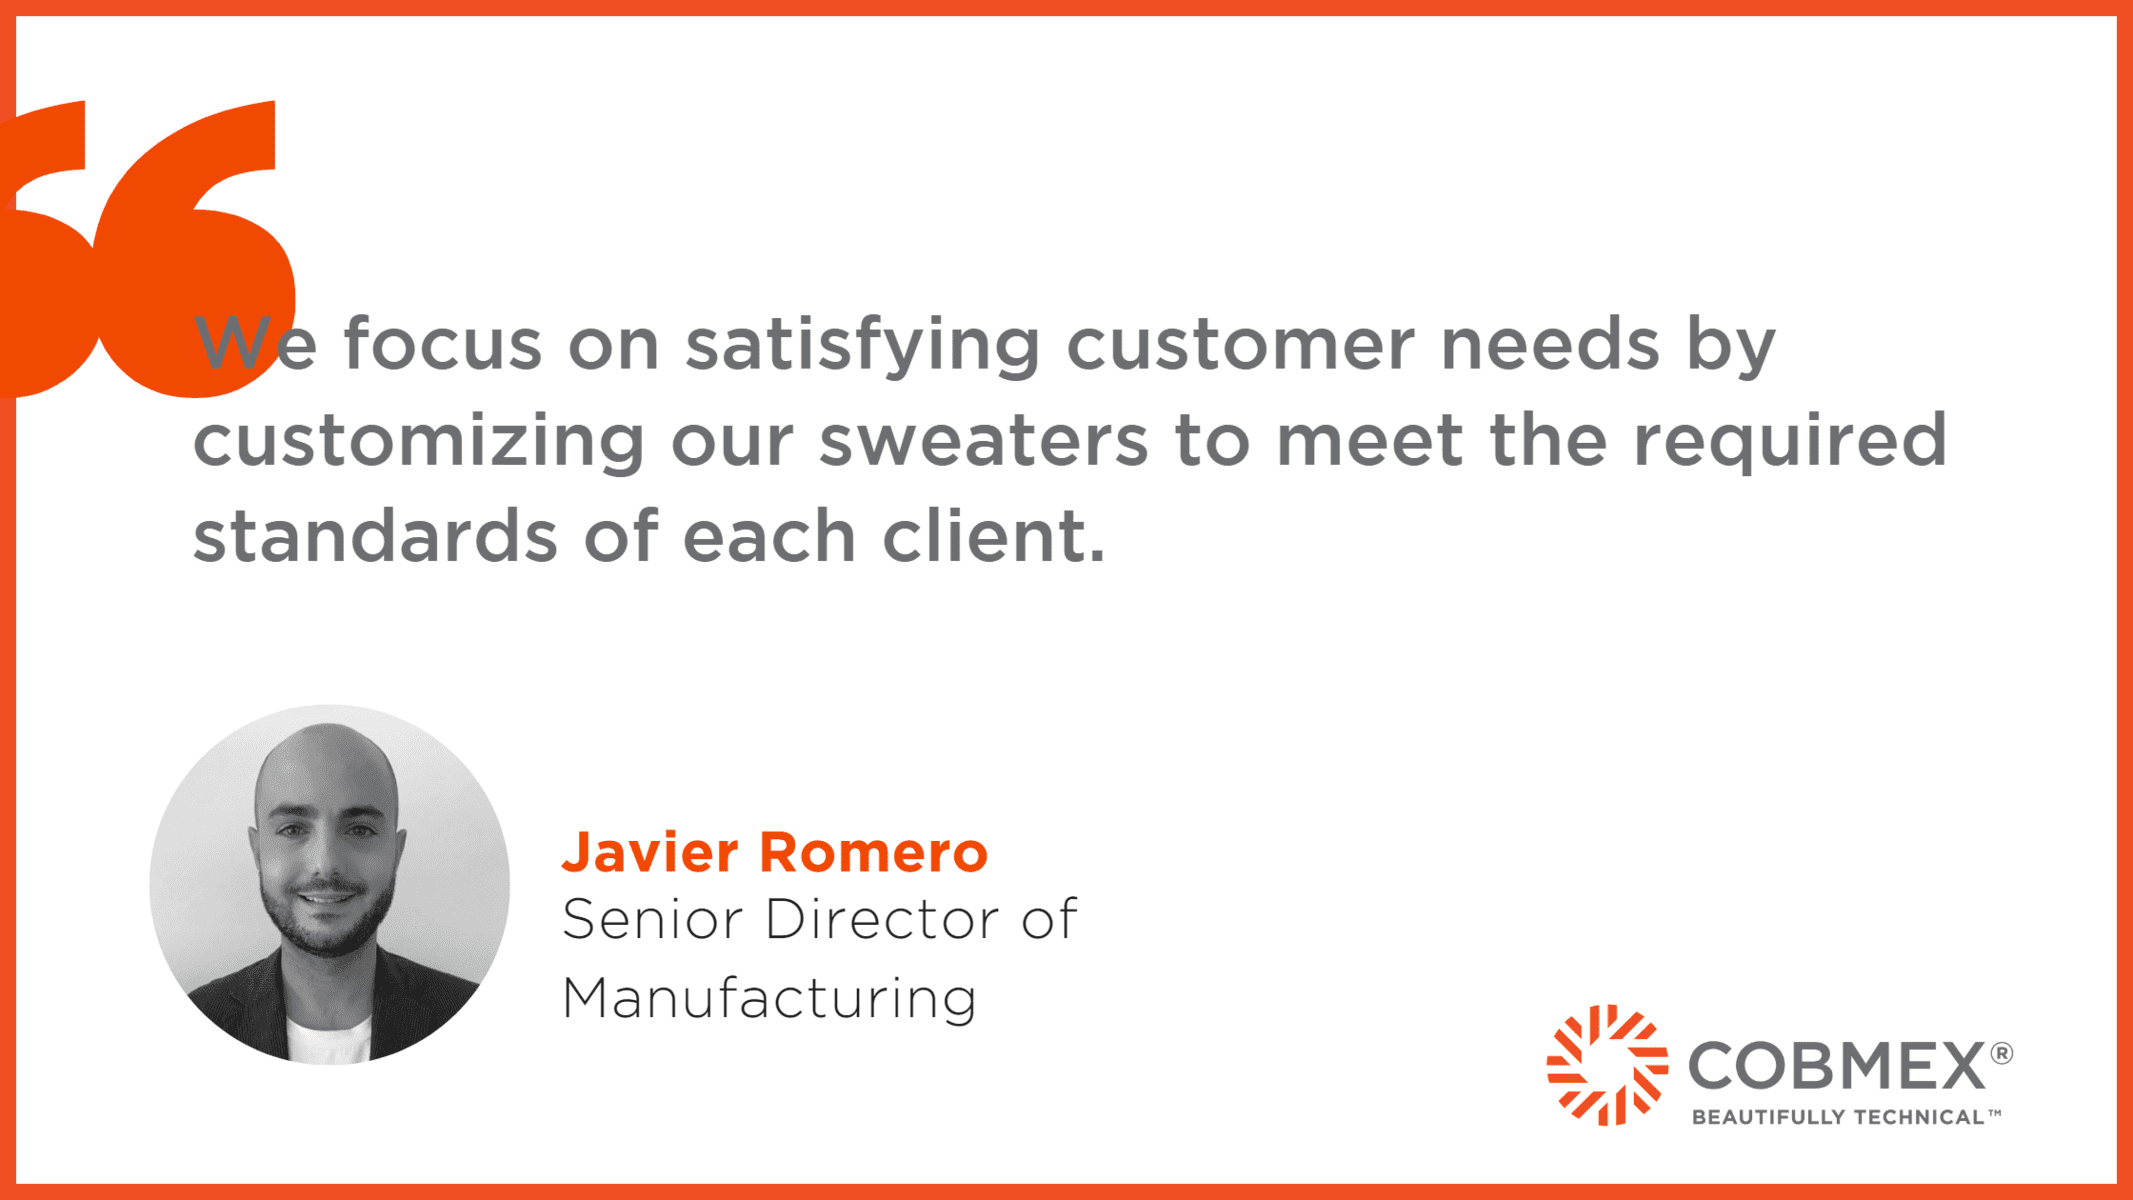 We focus on satisfying customer needs by customizing our sweaters to meet the required standards of each client.